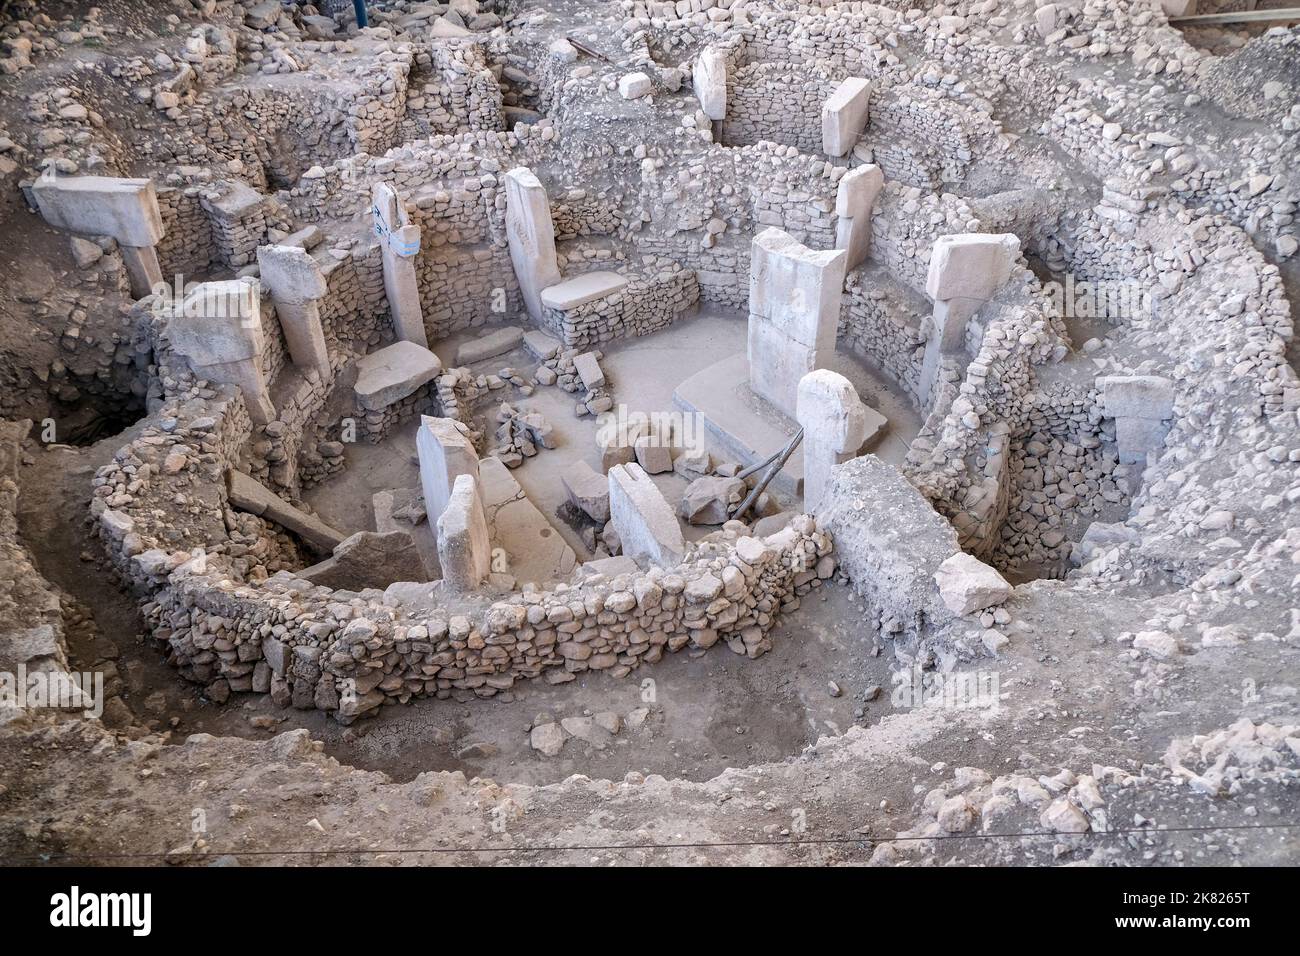 Göbeklitepe is located in upper Mesopotamia in a hilly region between the Tigris and Euphrates rivers. It is approximately 22 kilometers east of the c Stock Photo